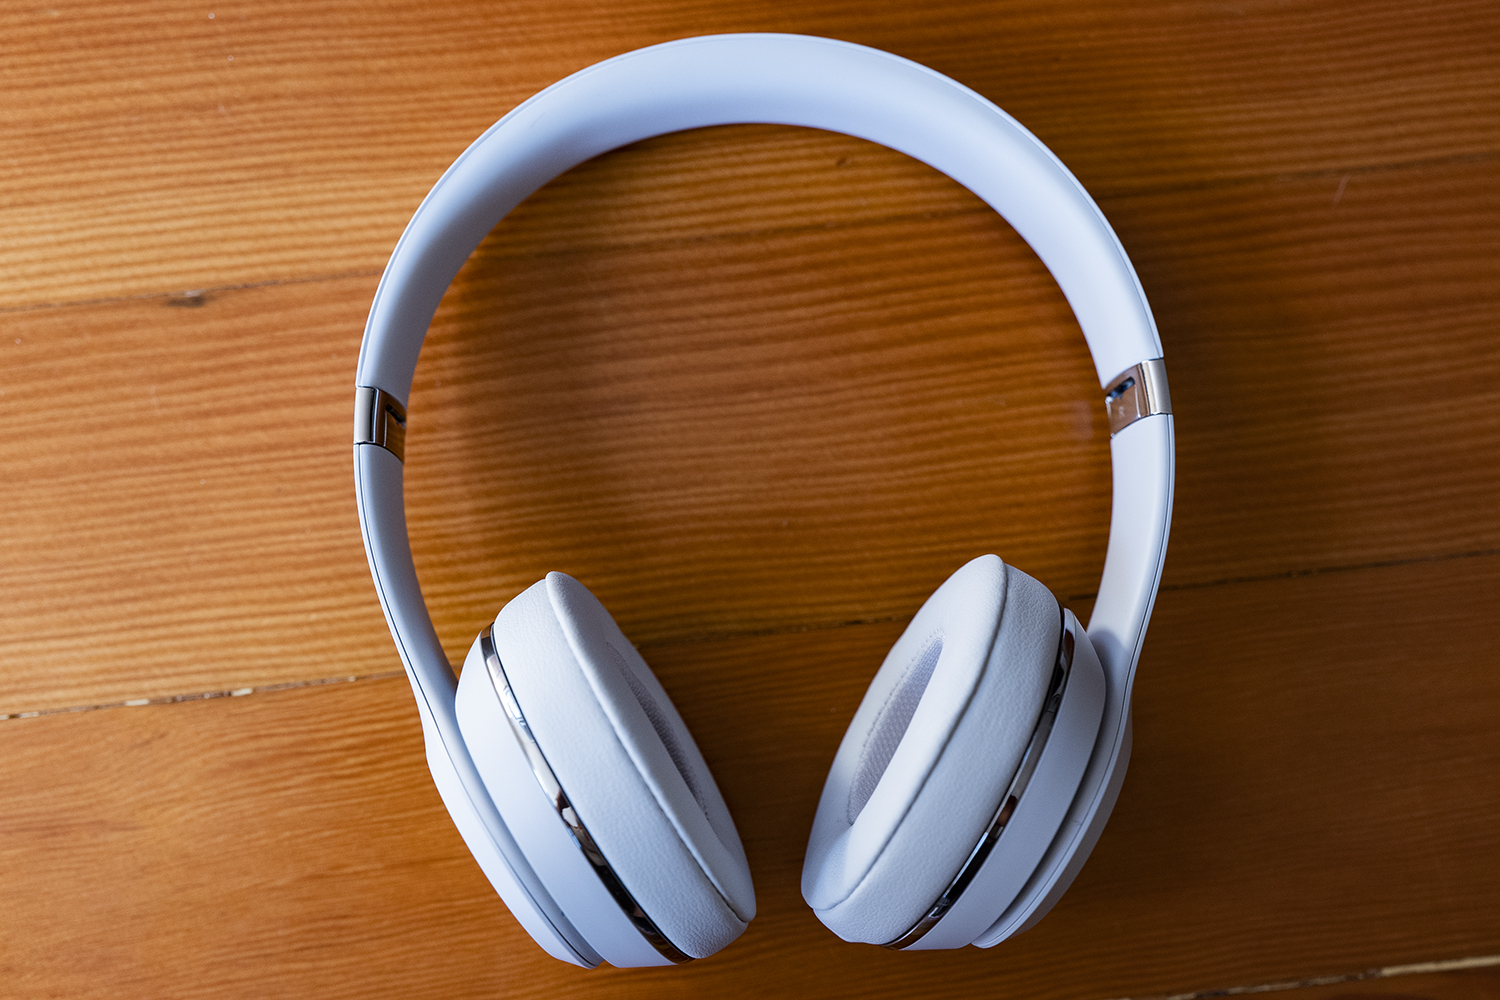 Beats Solo3 Headphones Review: Style Leads The Way | Digital